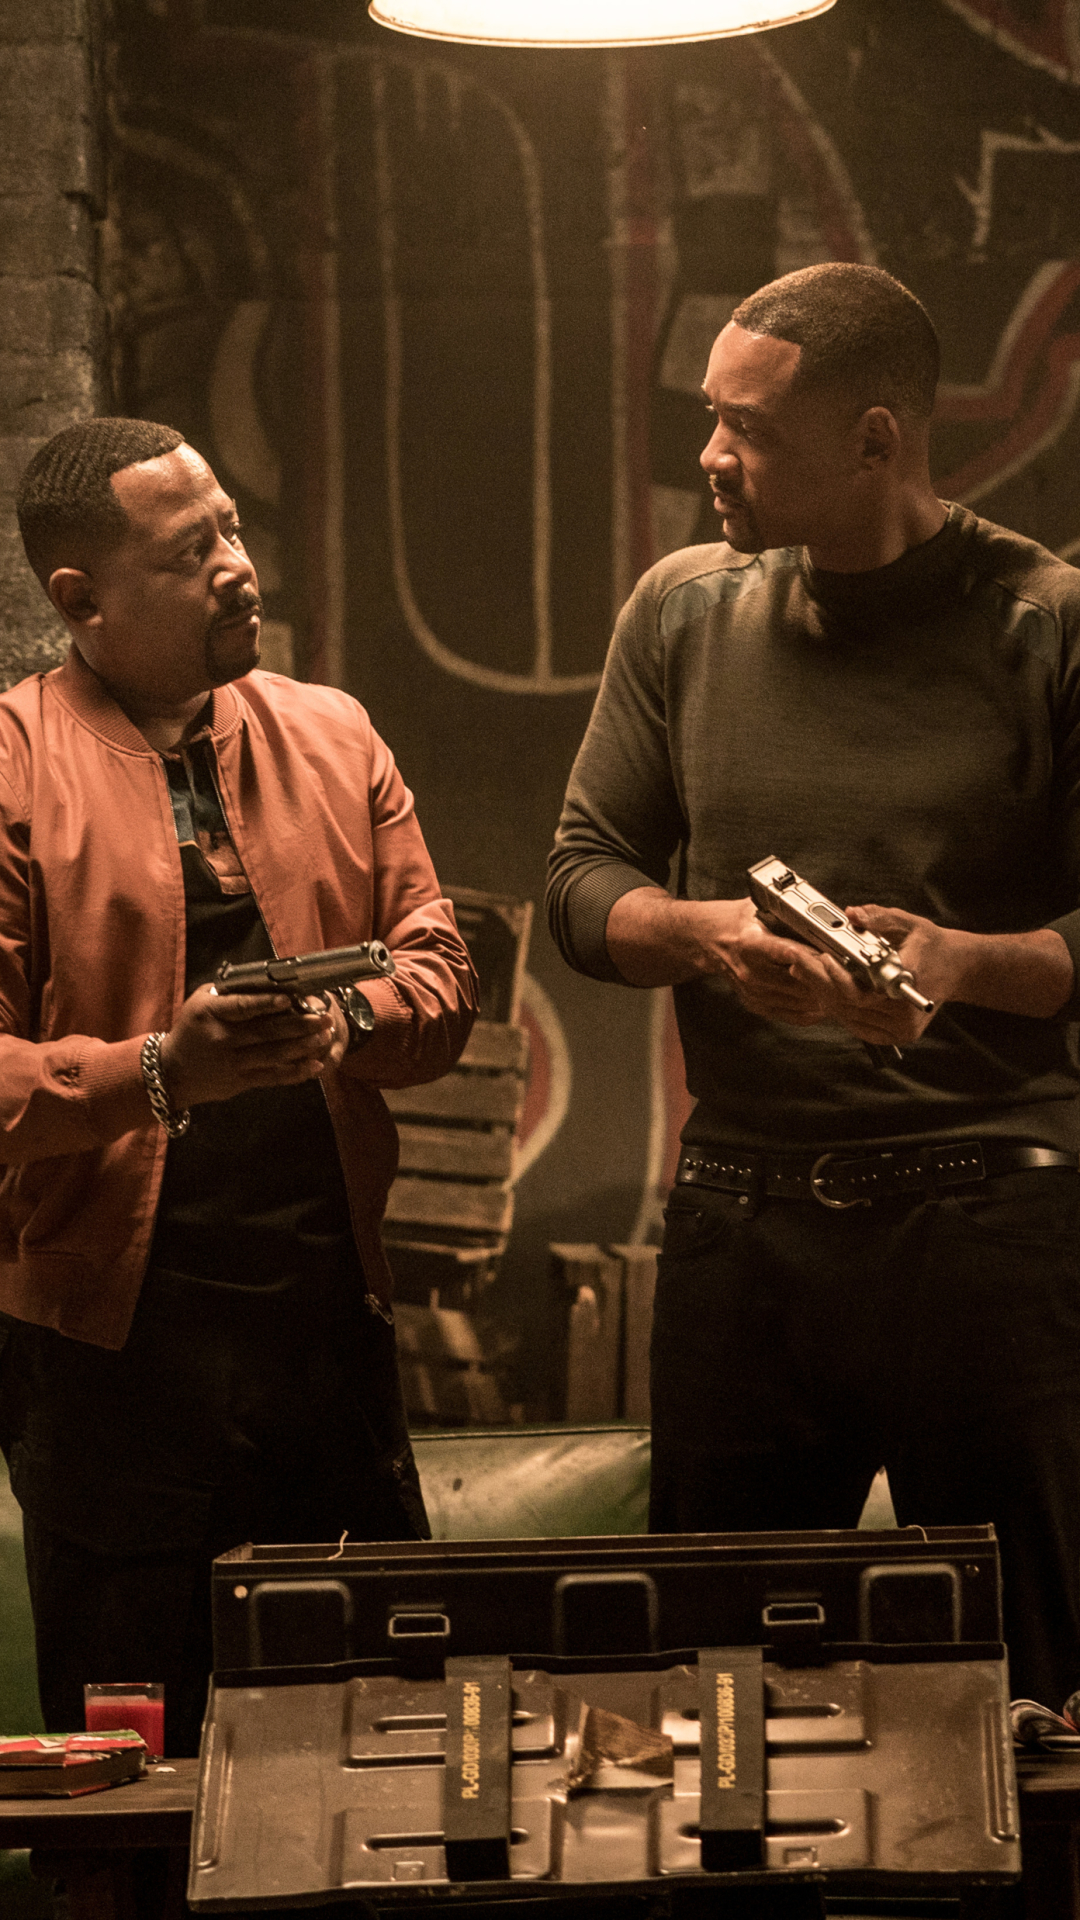 bad boys for life, will smith, movie, martin lawrence